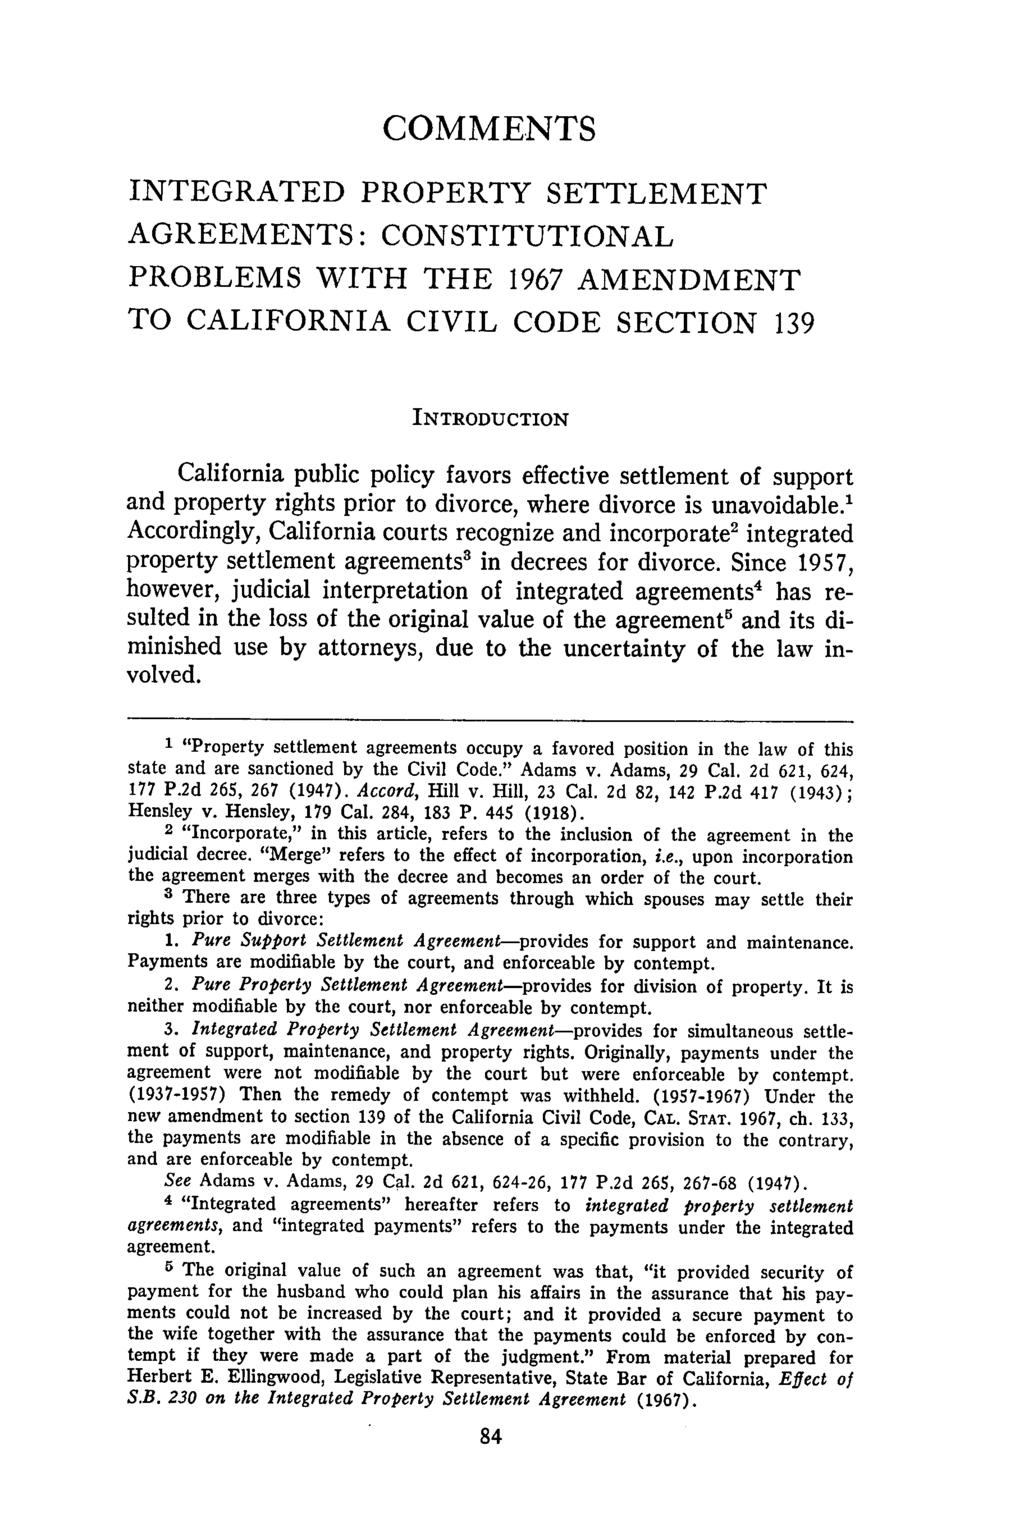 COMMENTS INTEGRATED PROPERTY SETTLEMENT AGREEMENTS: CONSTITUTIONAL PROBLEMS WITH THE 1967 AMENDMENT TO CALIFORNIA CIVIL CODE SECTION 139 INTRODUCTION California public policy favors effective